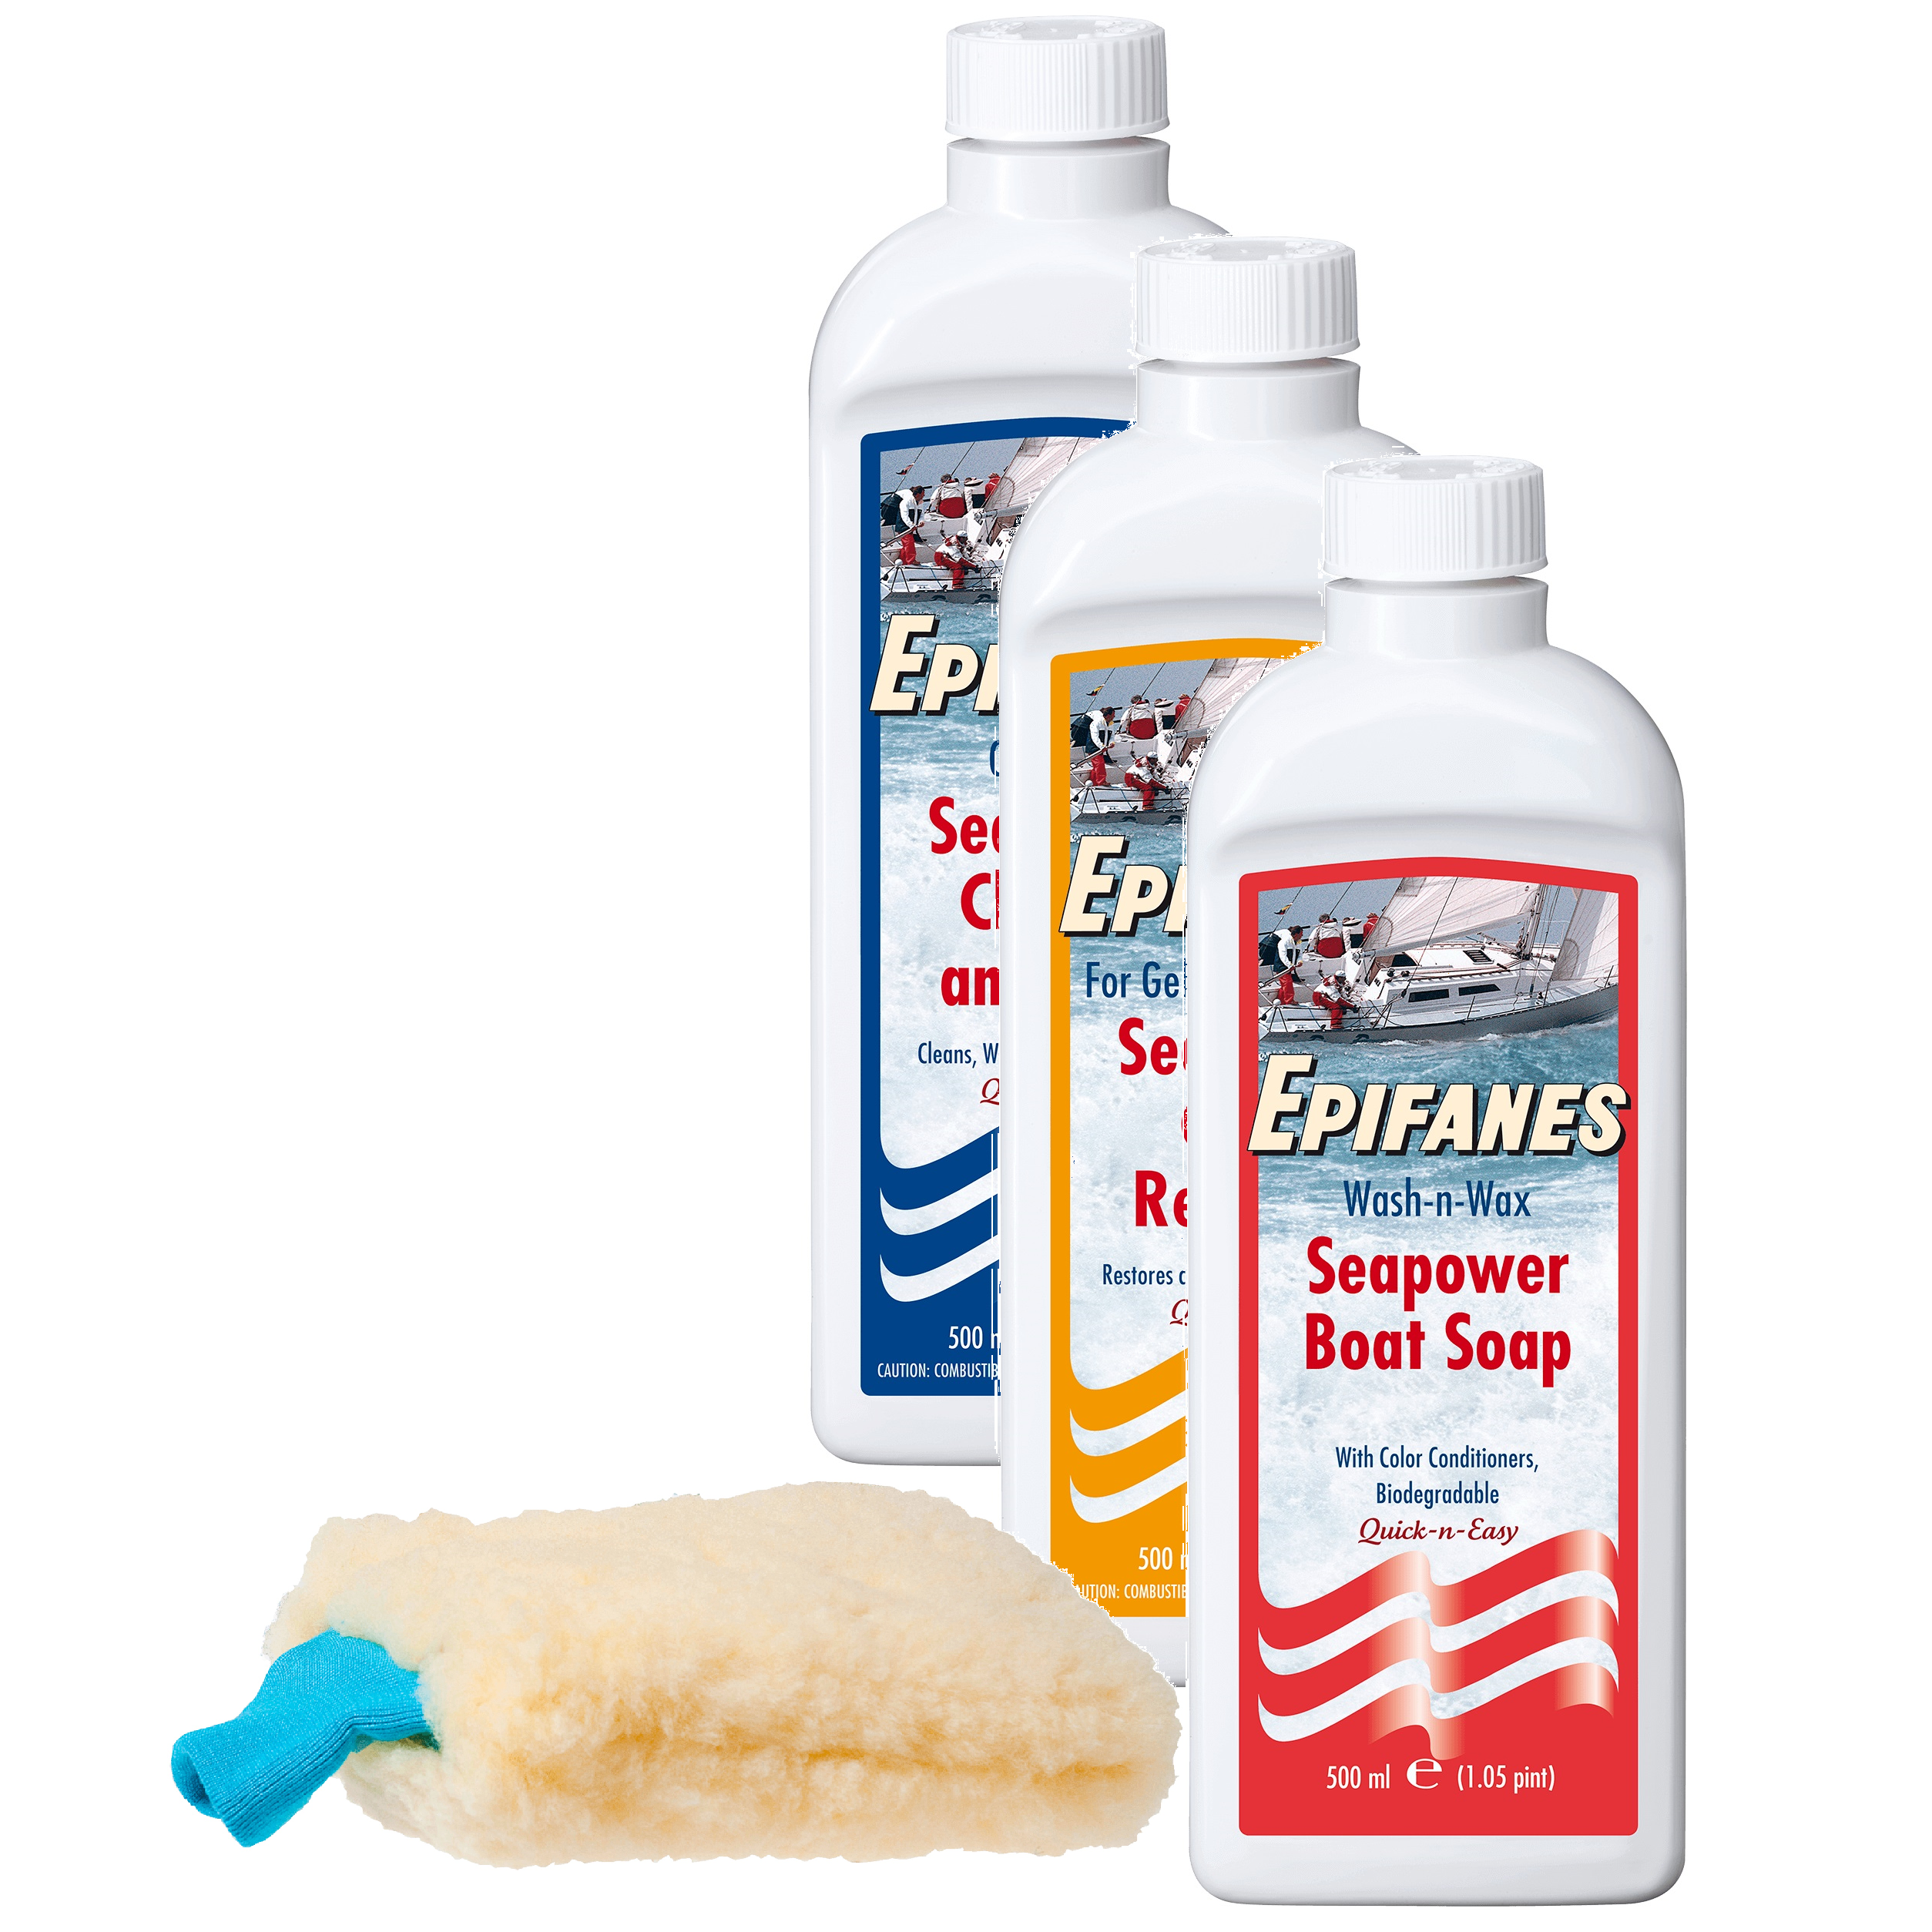 Epifanes Seapower Super Poly Boat Wax